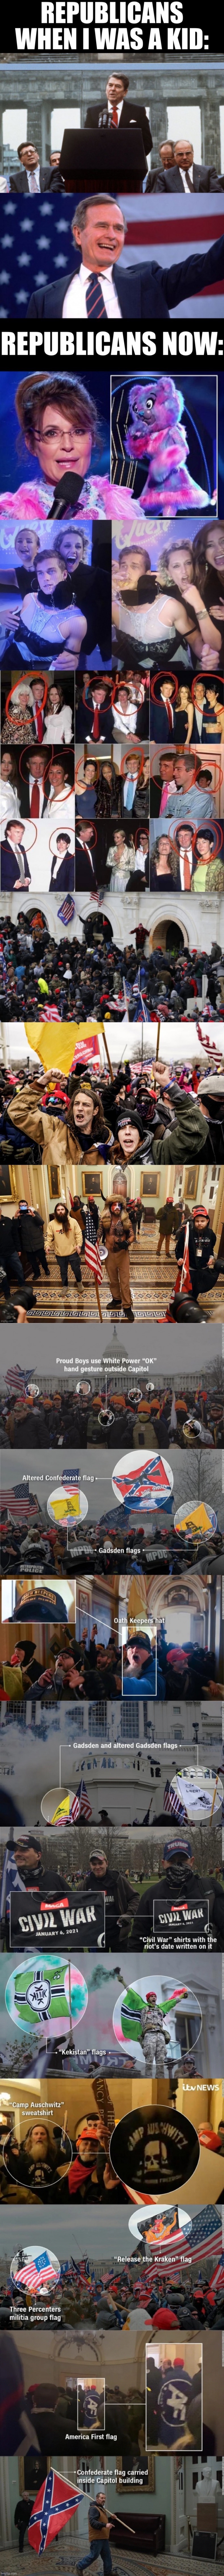 When they cross the border into our nation’s capital, the Republican Party’s not sending their best! | image tagged in republicans then vs republicans now,capitol hill riot groups insignia,gop,republicans,republican party,scumbag republicans | made w/ Imgflip meme maker